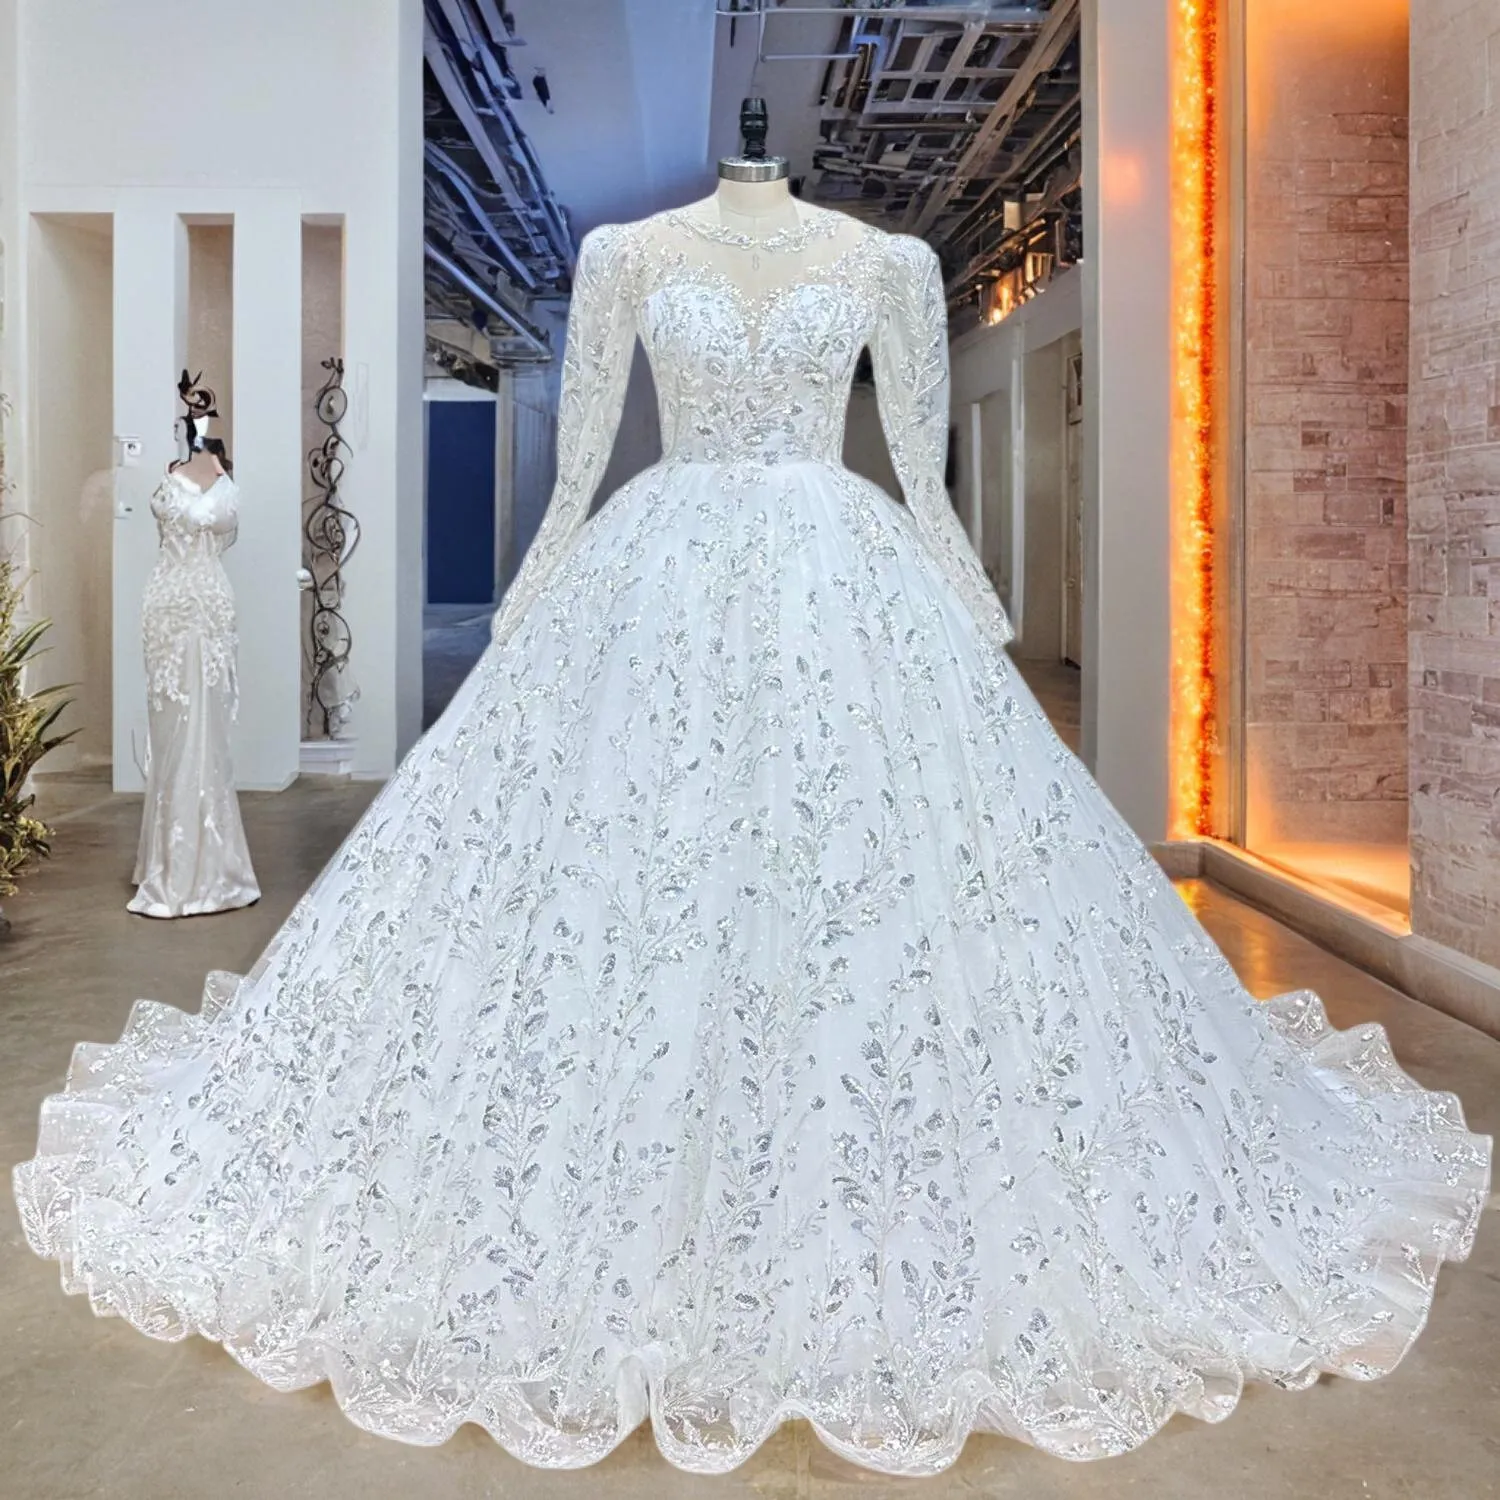 Lnyer Scallopes Neck Lace up back long longleseve beads Pearls Sequins Shiny Ball Gown Wedding Dresses Real Office Photosビデオ